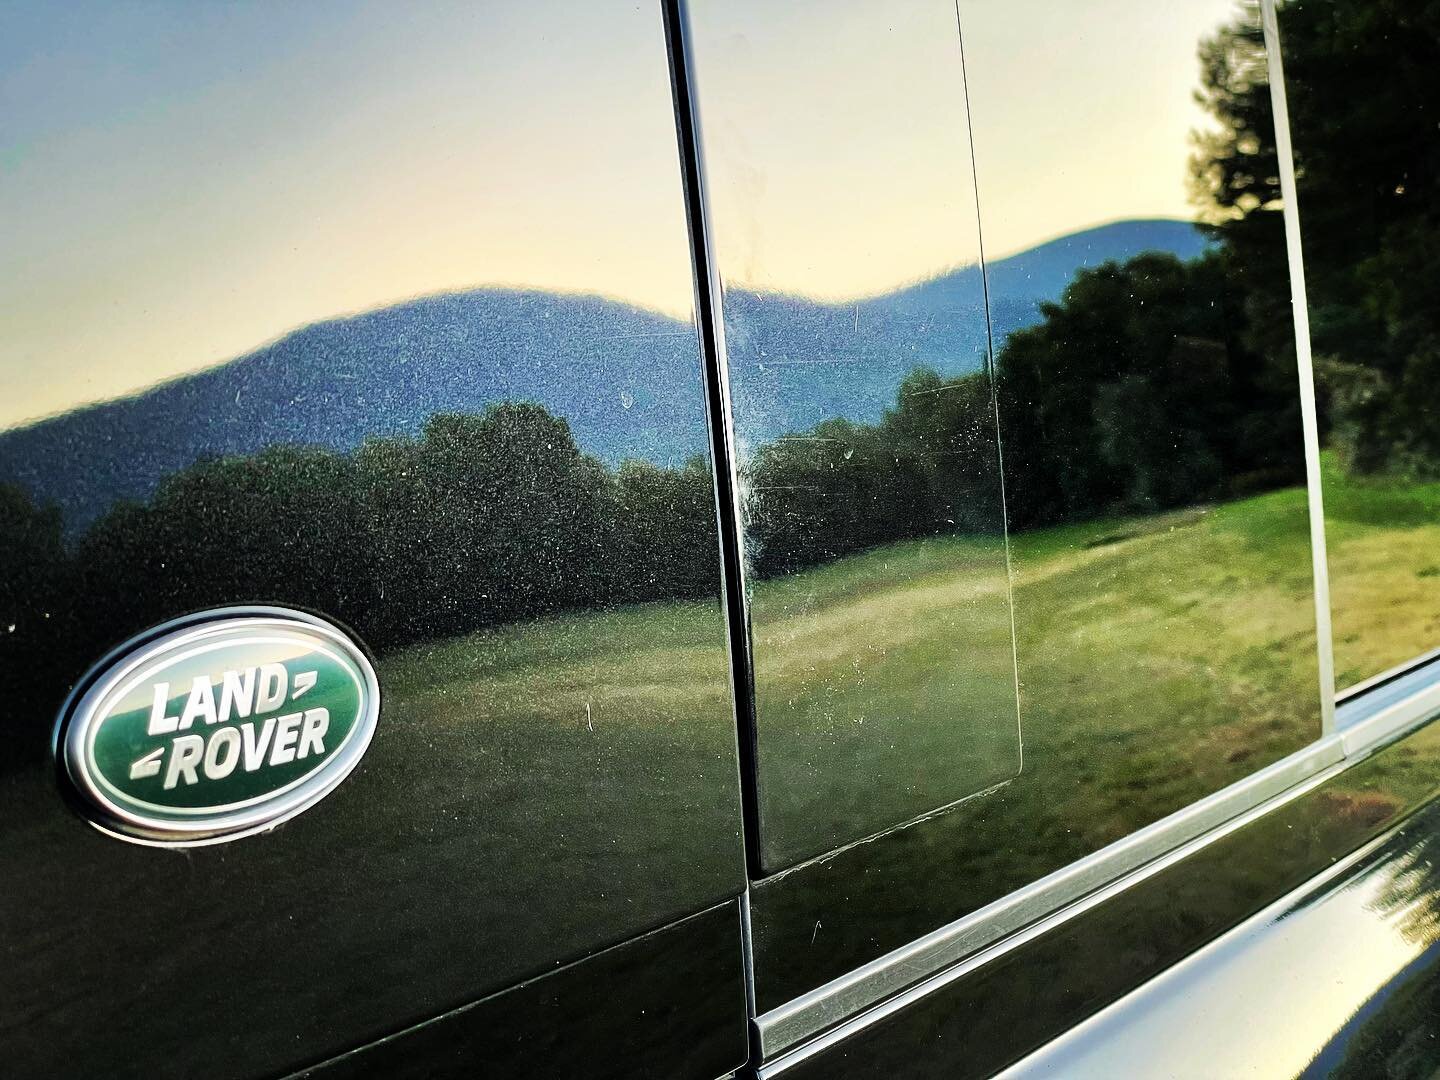 Finally found a good way to shoot black cars- use it as a mirror. Getting closer TRēK, and almost ready for the first competitors to come next week. 

#landrovertrek #landroverusa @sea2sum #newdefender #newdefender110 #photgraphy #blackcarsmatter